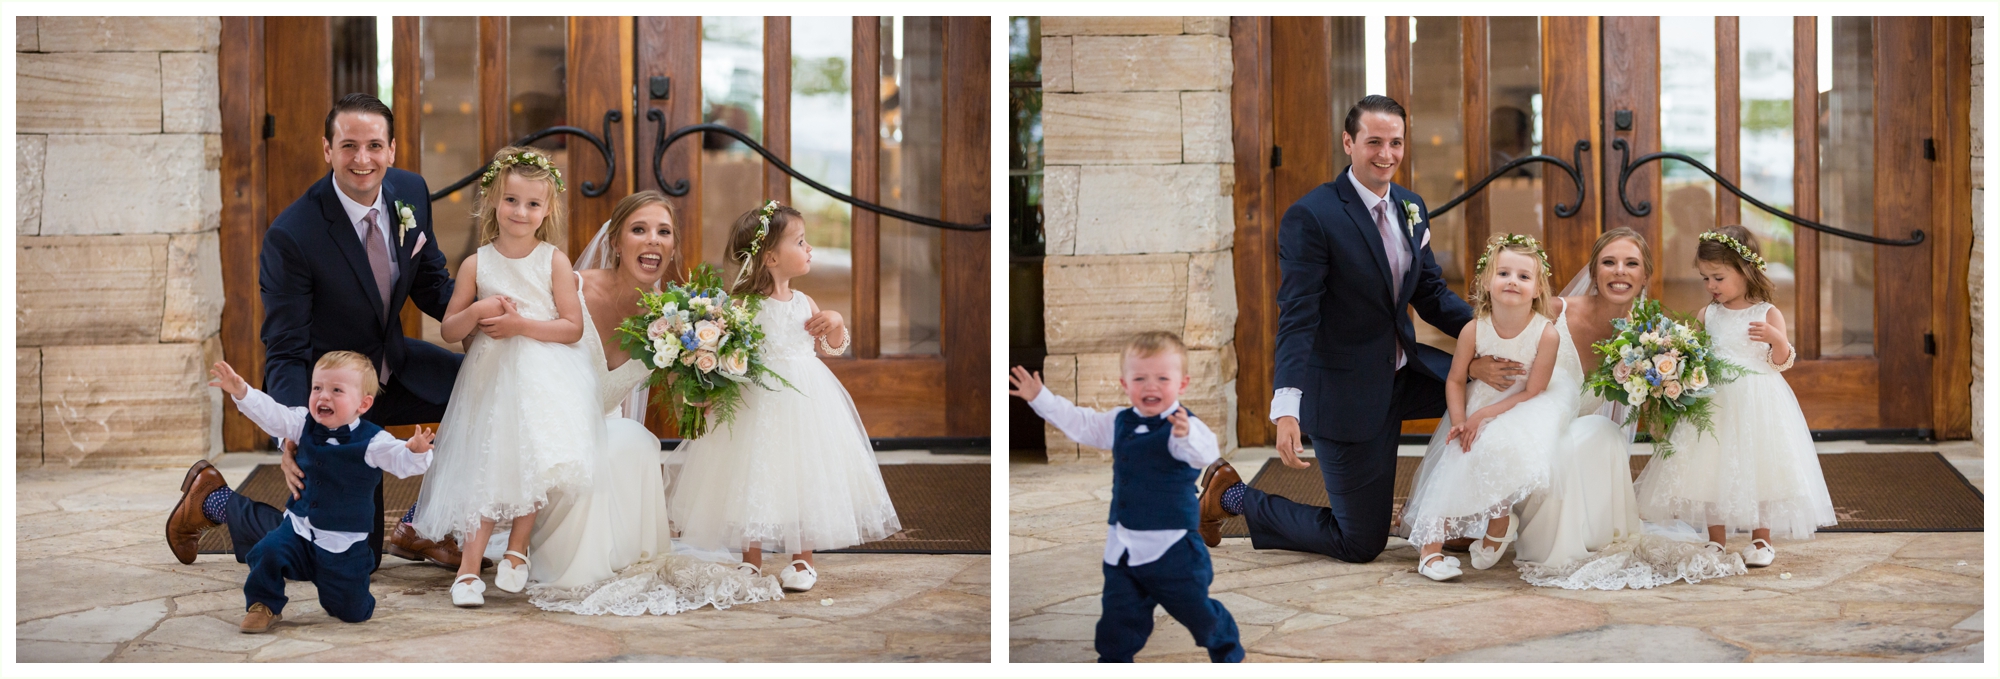 bride and groom funny candids with flower girls and ring bearer